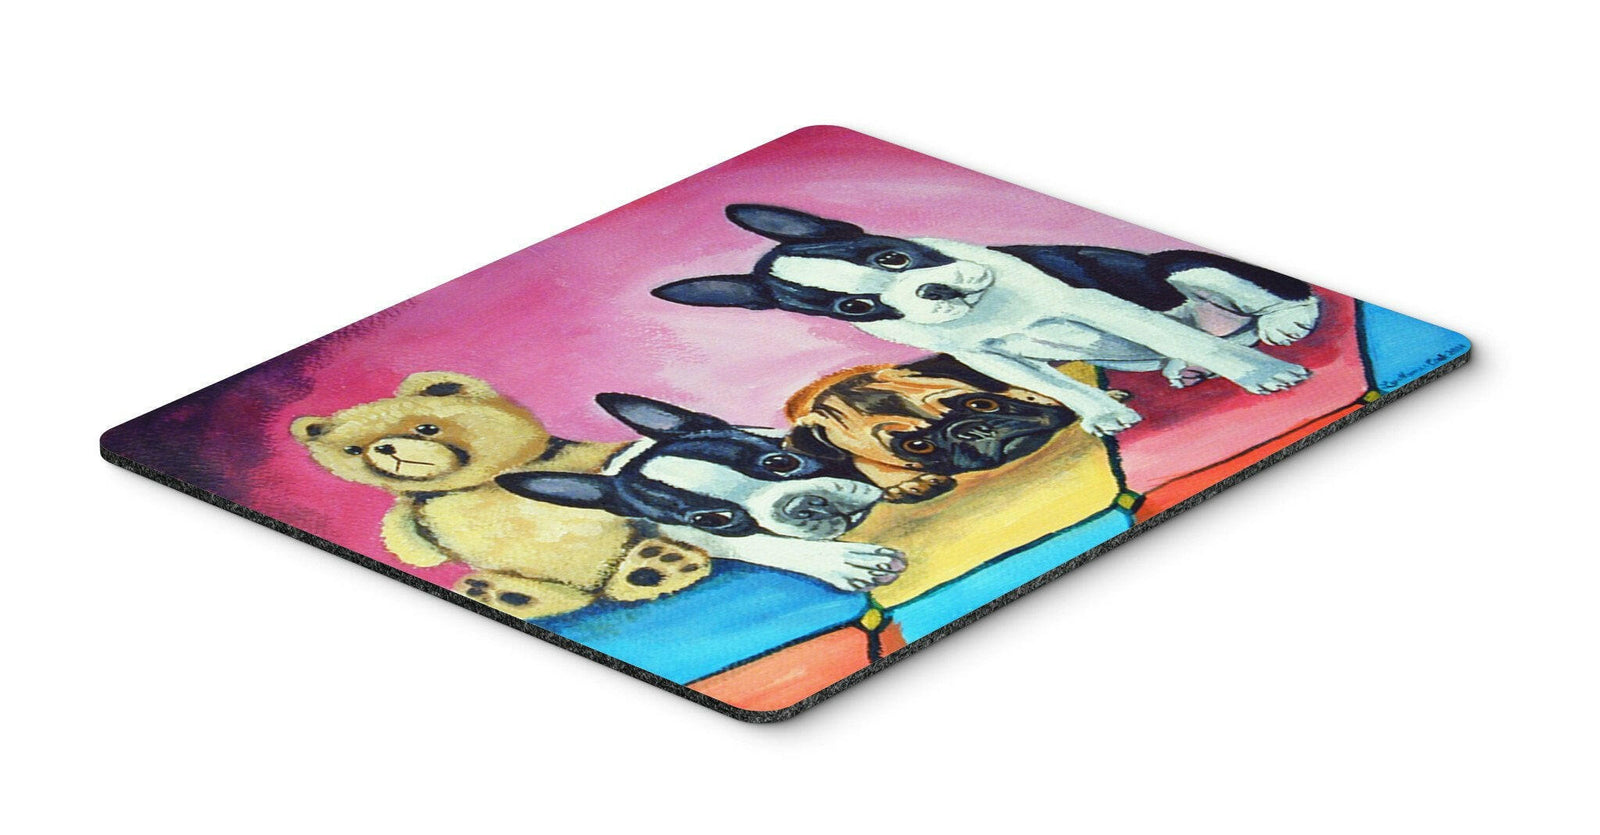 Multiple Breeds Mouse pad, hot pad, or trivet by Caroline's Treasures